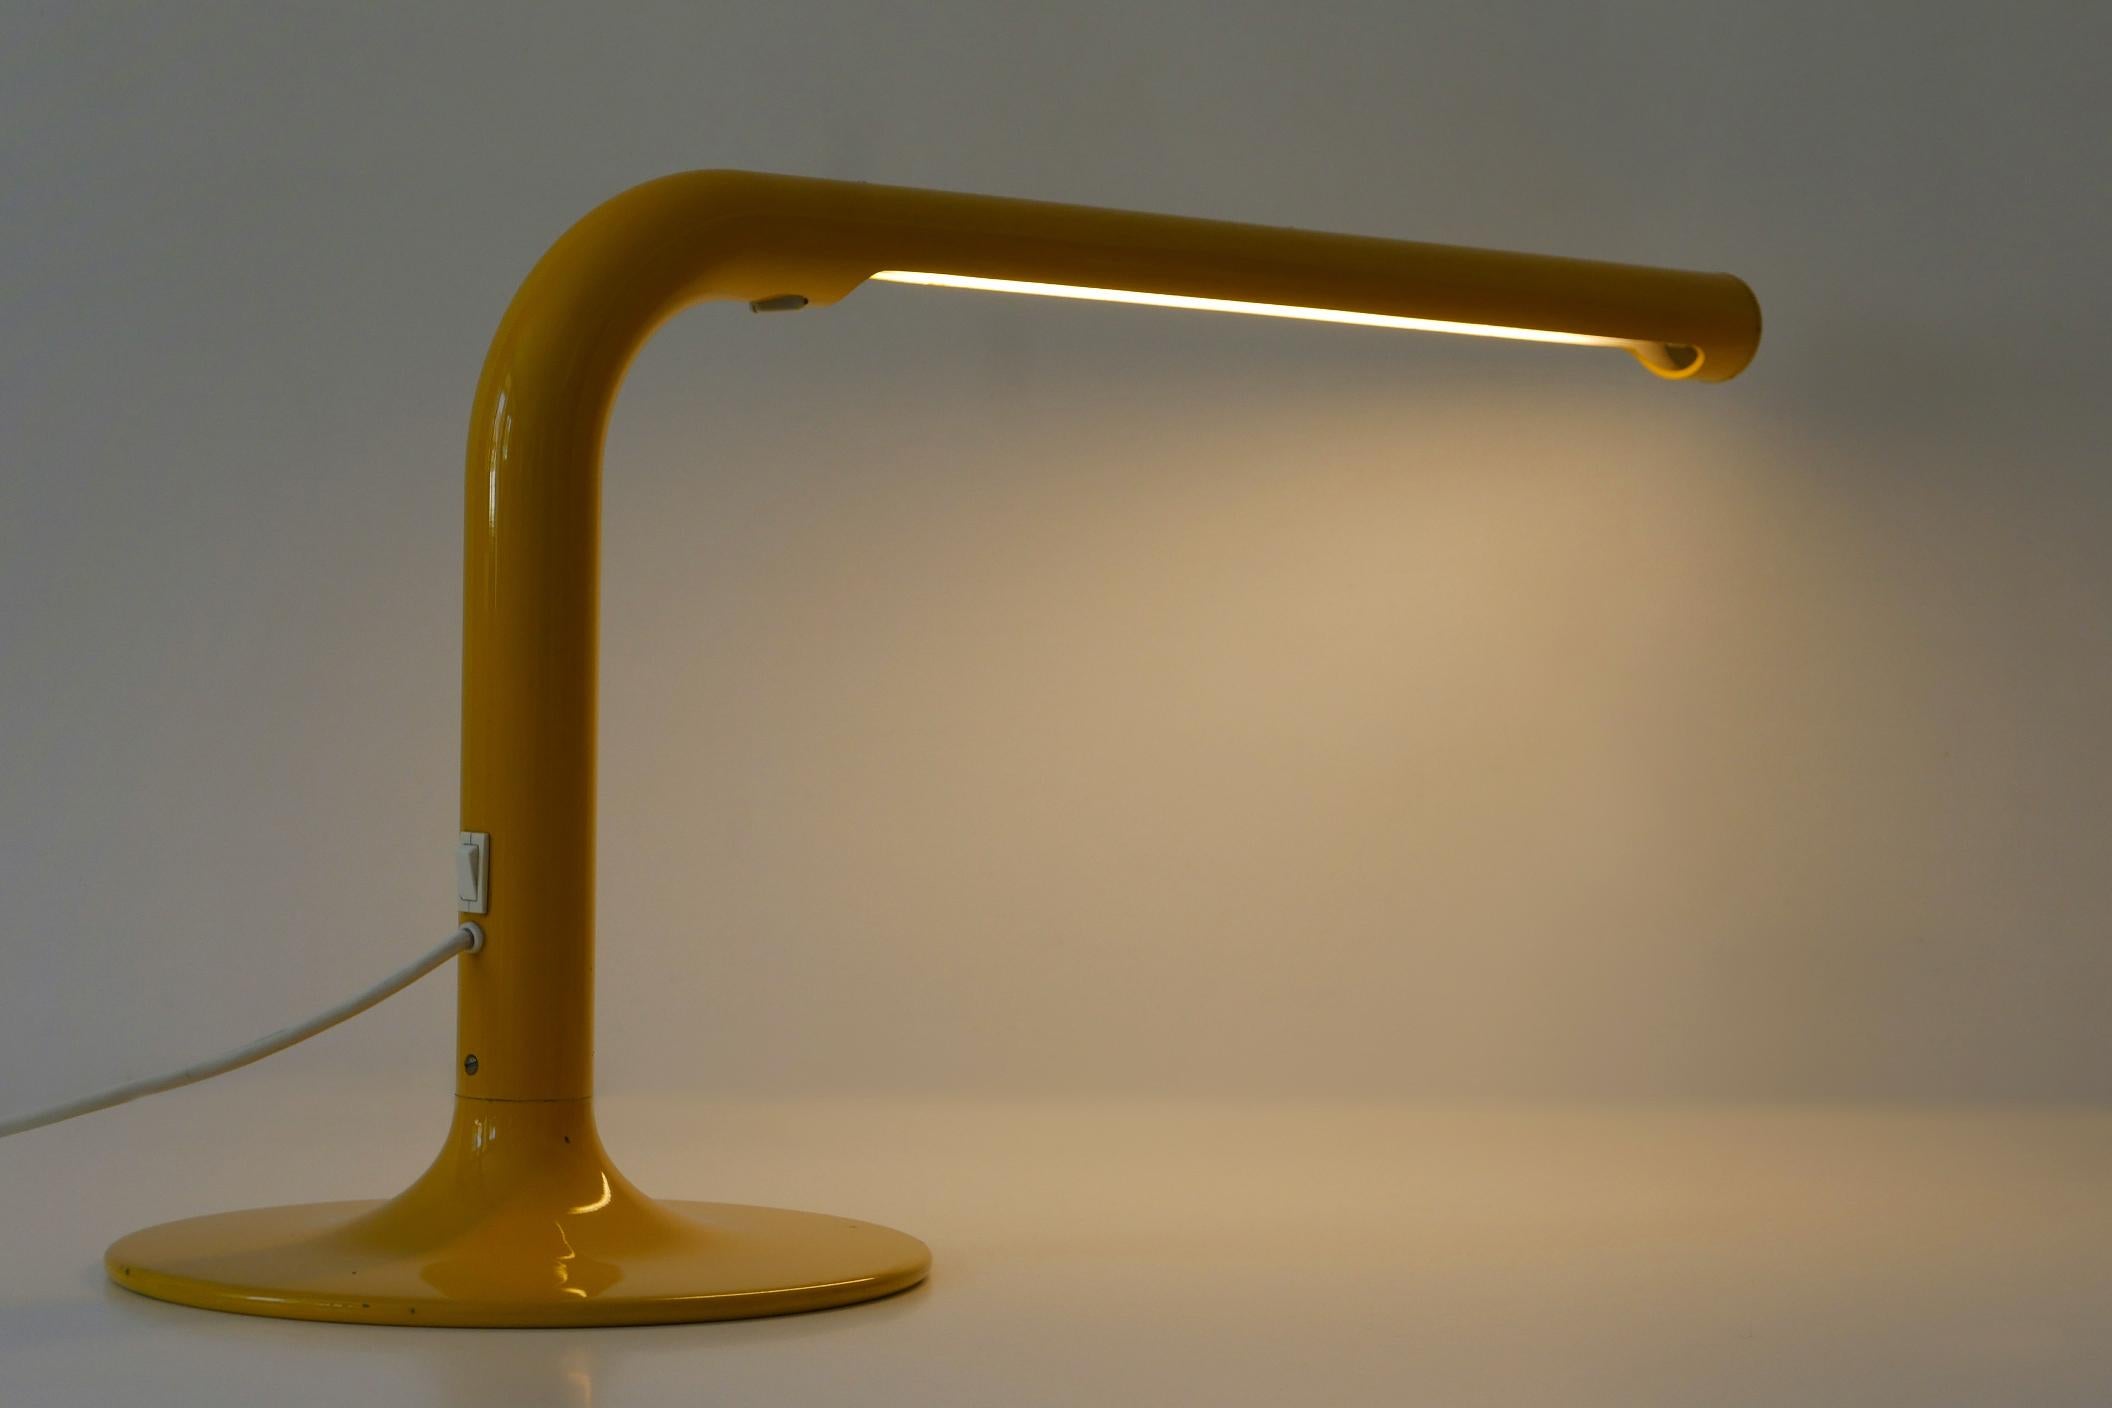 Large & Elegant Tube Table Lamp by Anders Pehrson for Ateljé Lyktan, 1960s For Sale 4